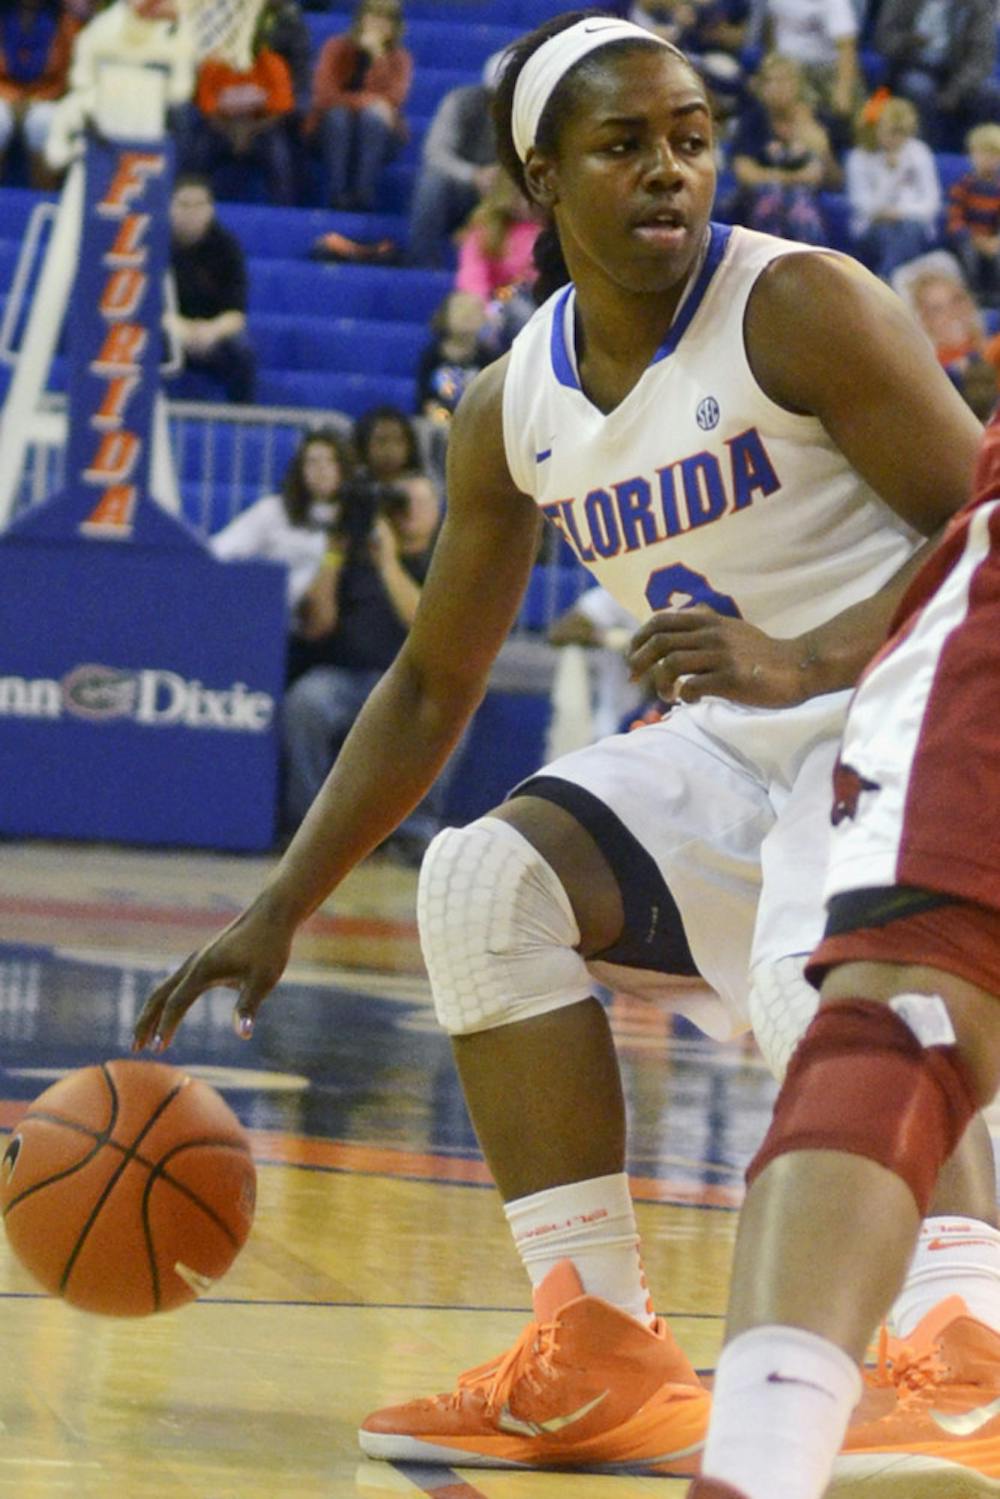 <p>January Miller drives into the lane during Florida's 72-58 win against Arkansas on Sunday in the O'Connell Center.</p>